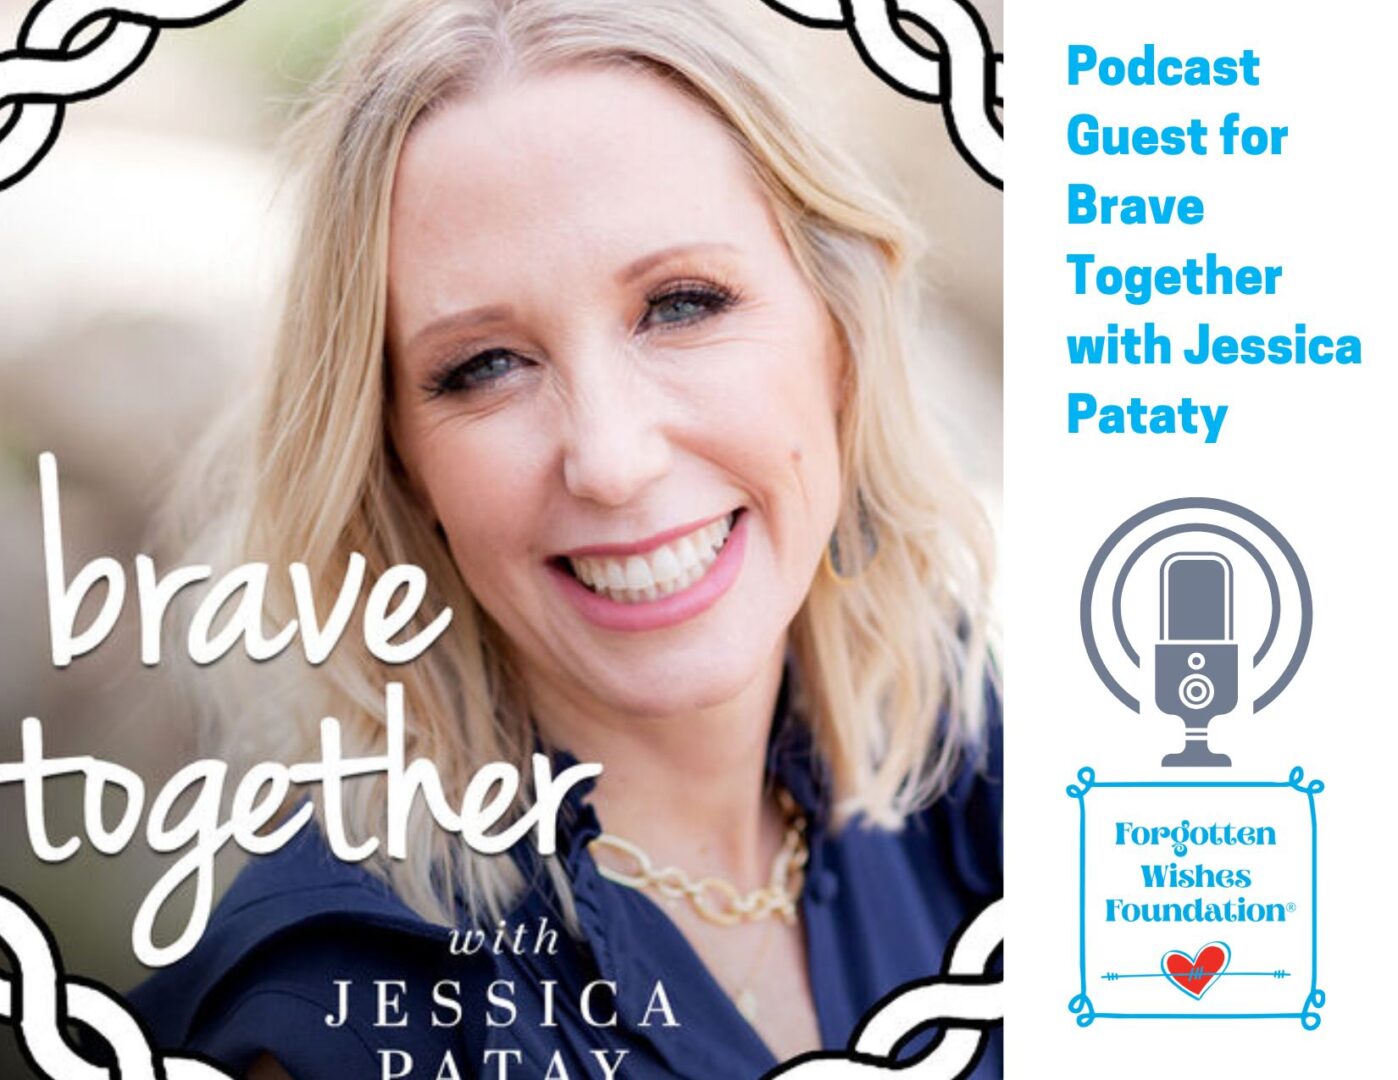 Jessica Patay is a women with blond hair and smiling. She is the Founder of We Are Brave Together Nonprofit